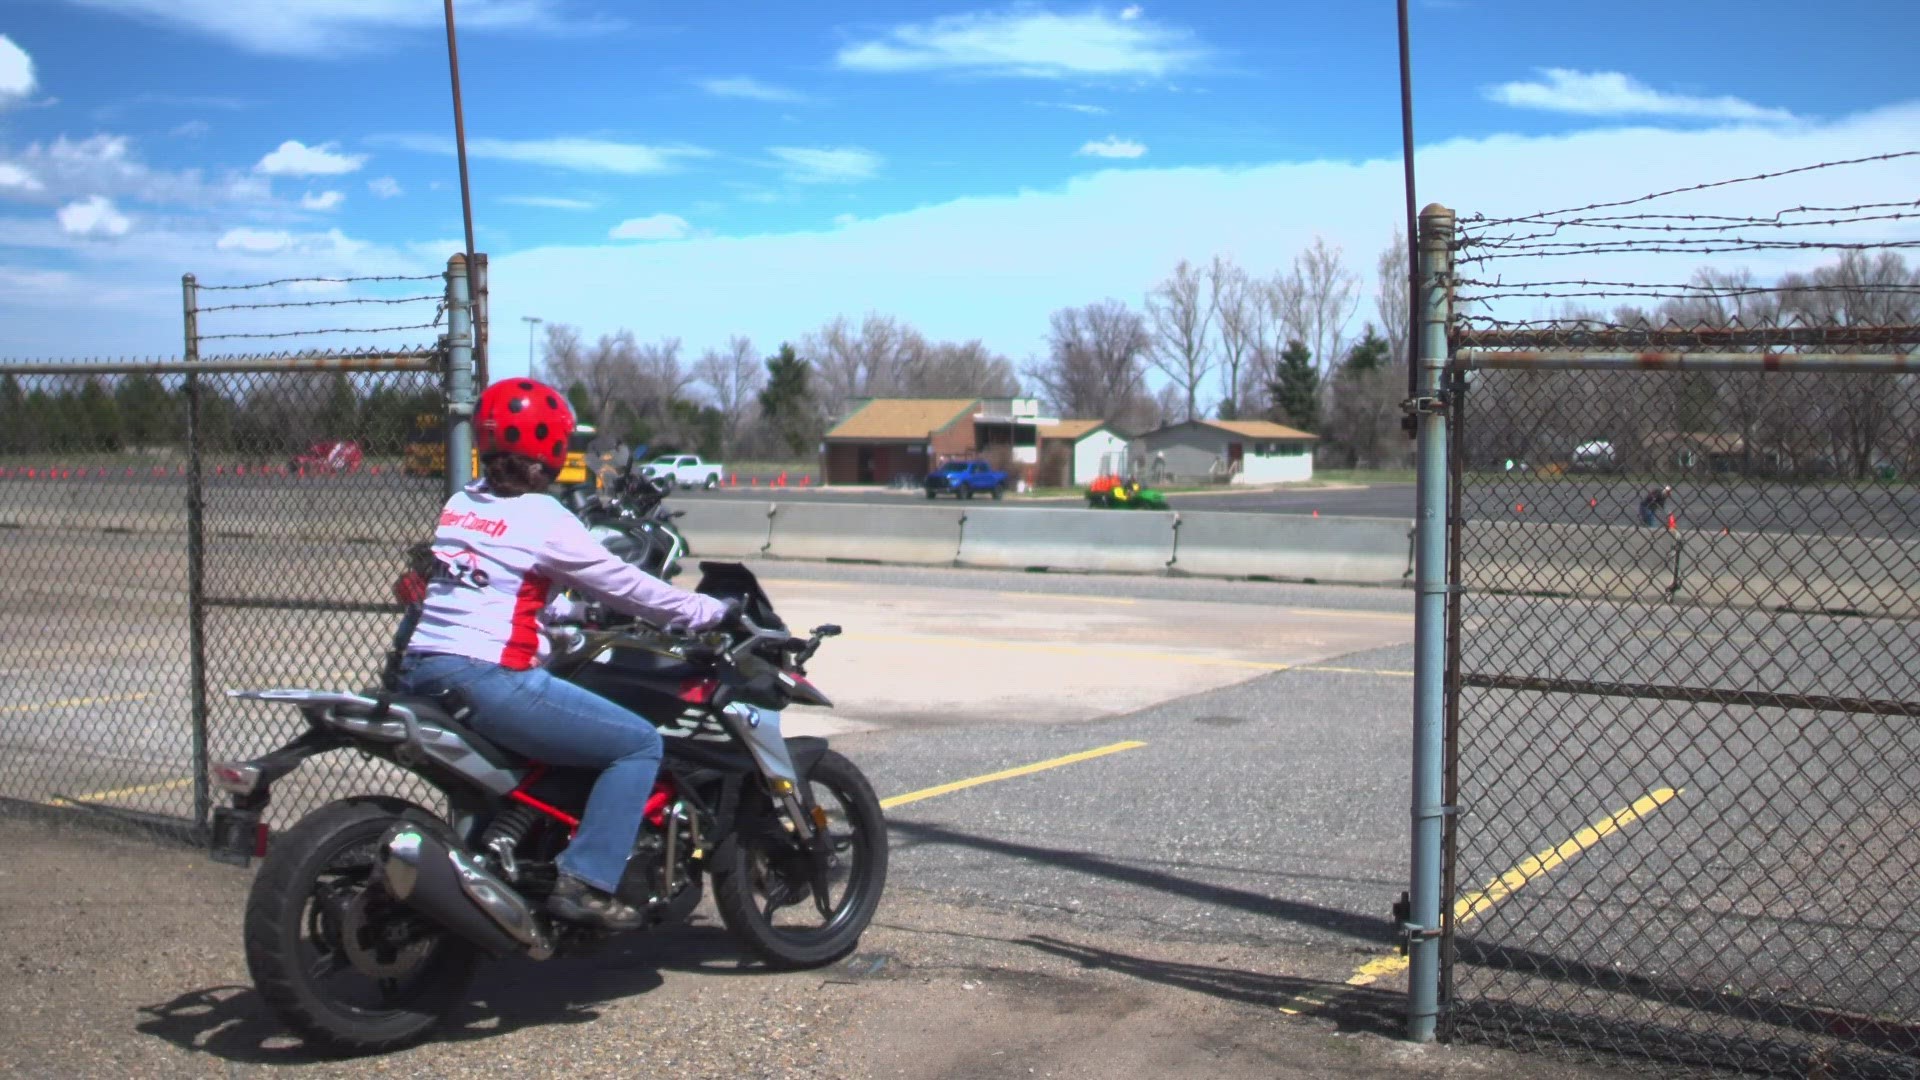 Lane filtering is now legalized in Colorado, but there's a few caveats. For one, motorcyclists cannot pass cars at speeds faster than 15 miles per hour.